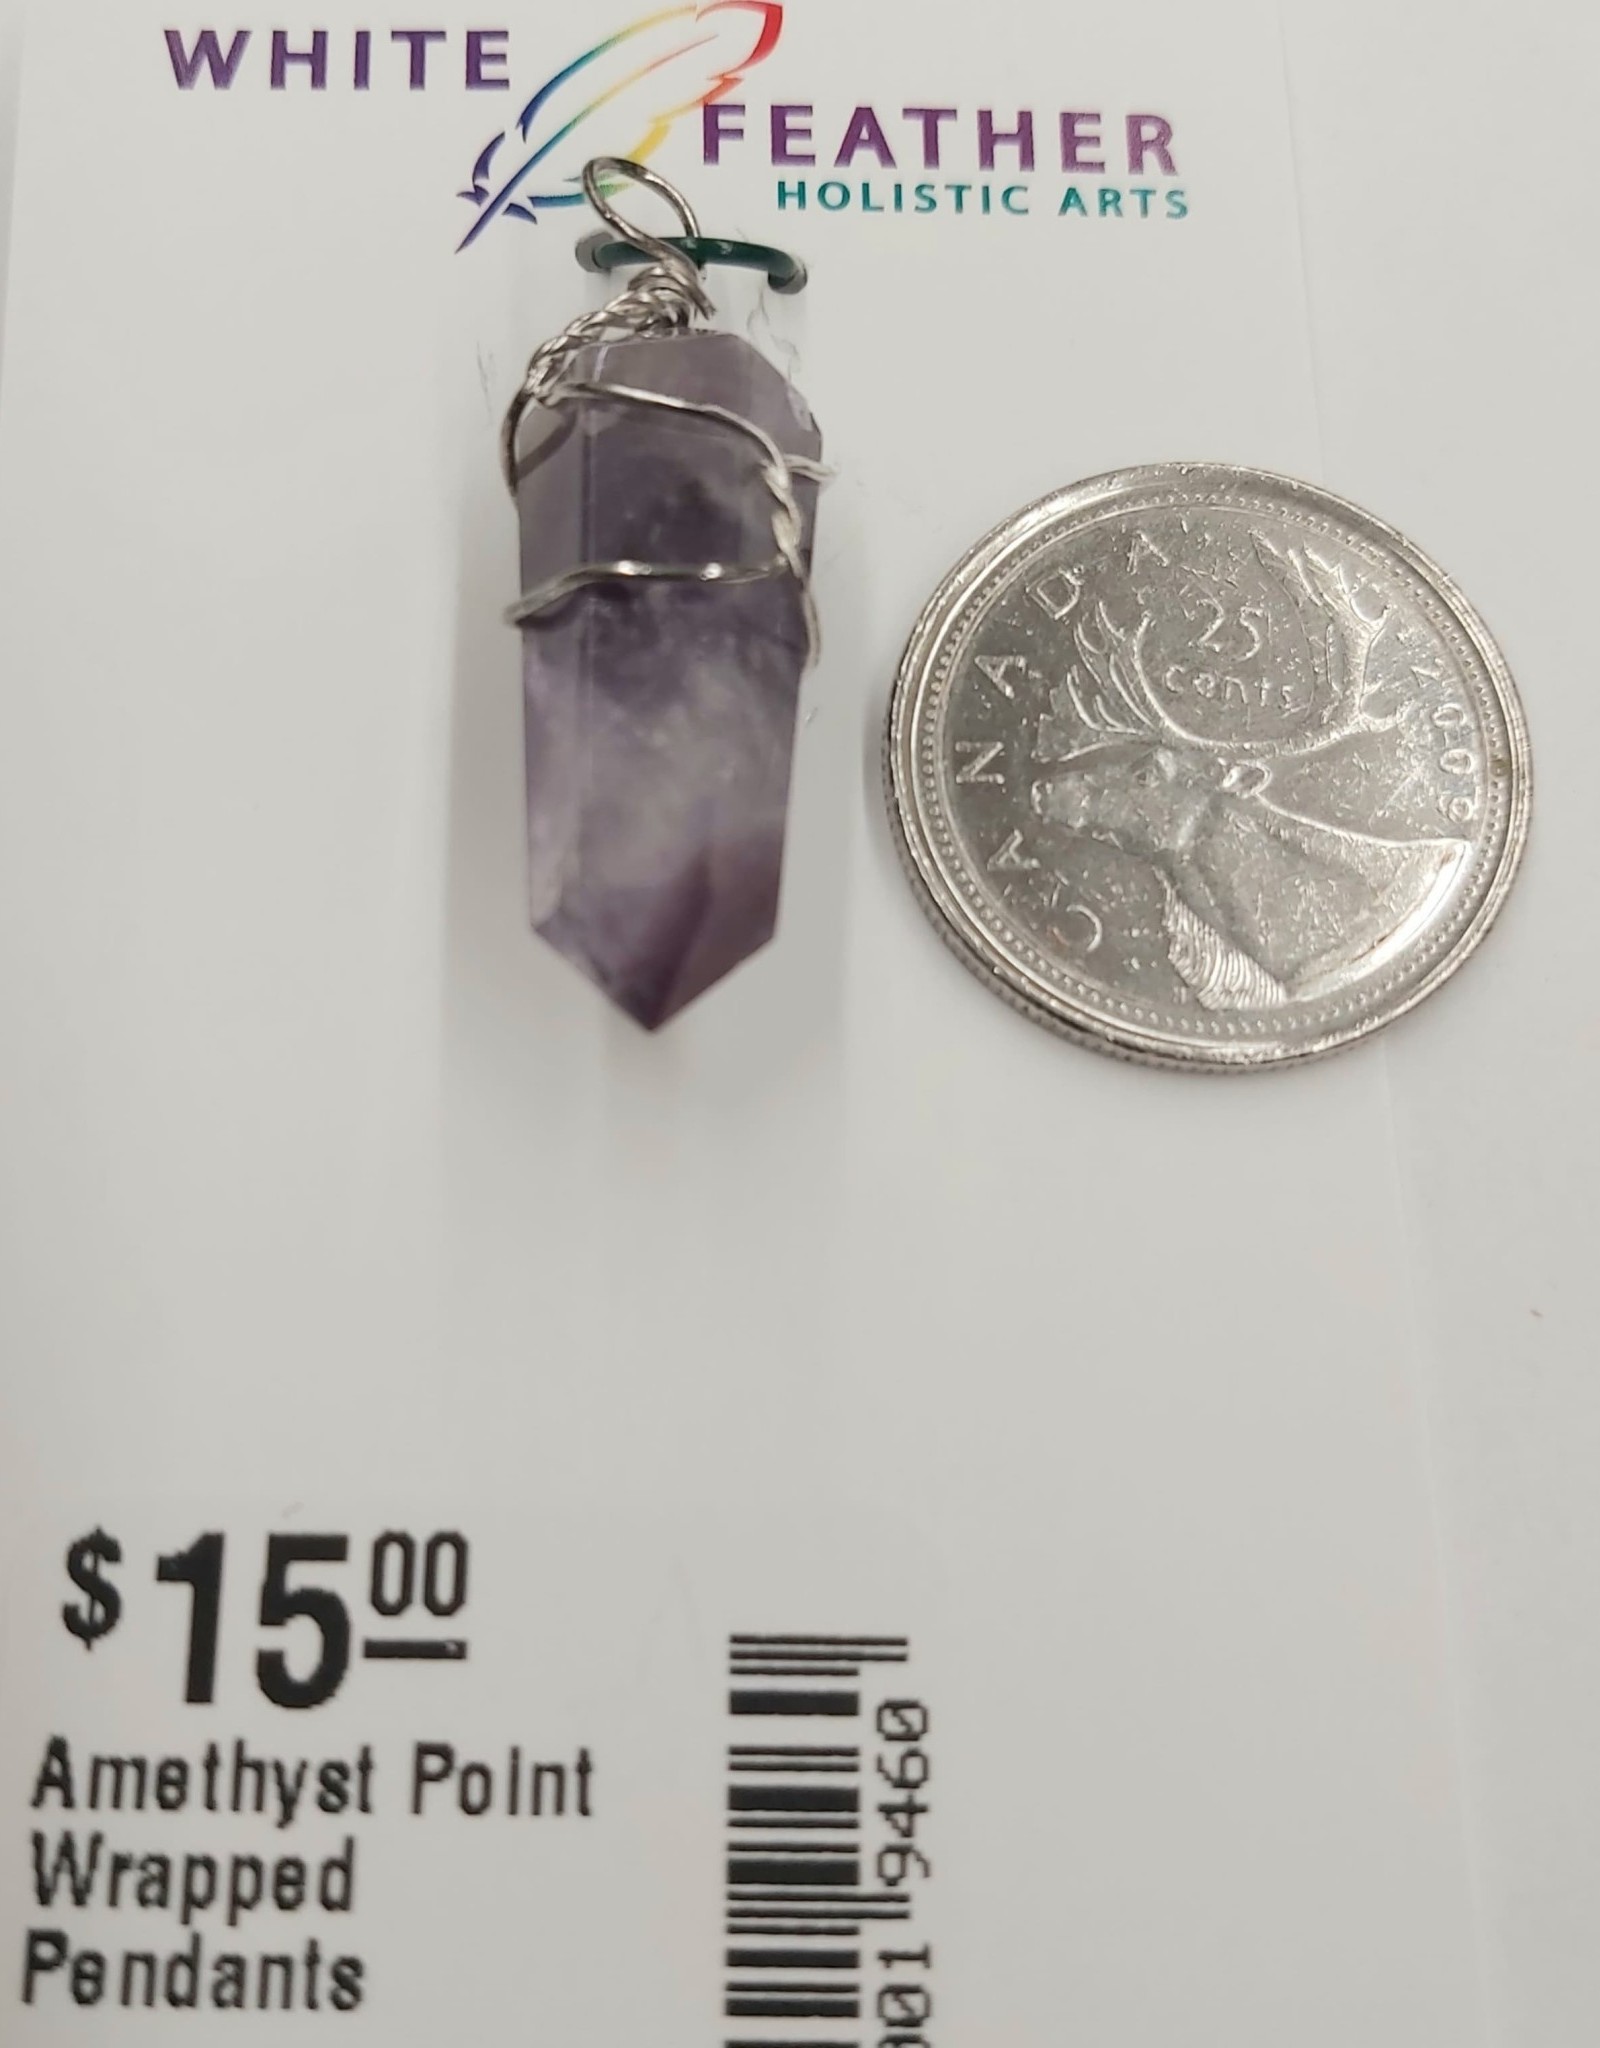 Amethyst Point Wrapped Pendants